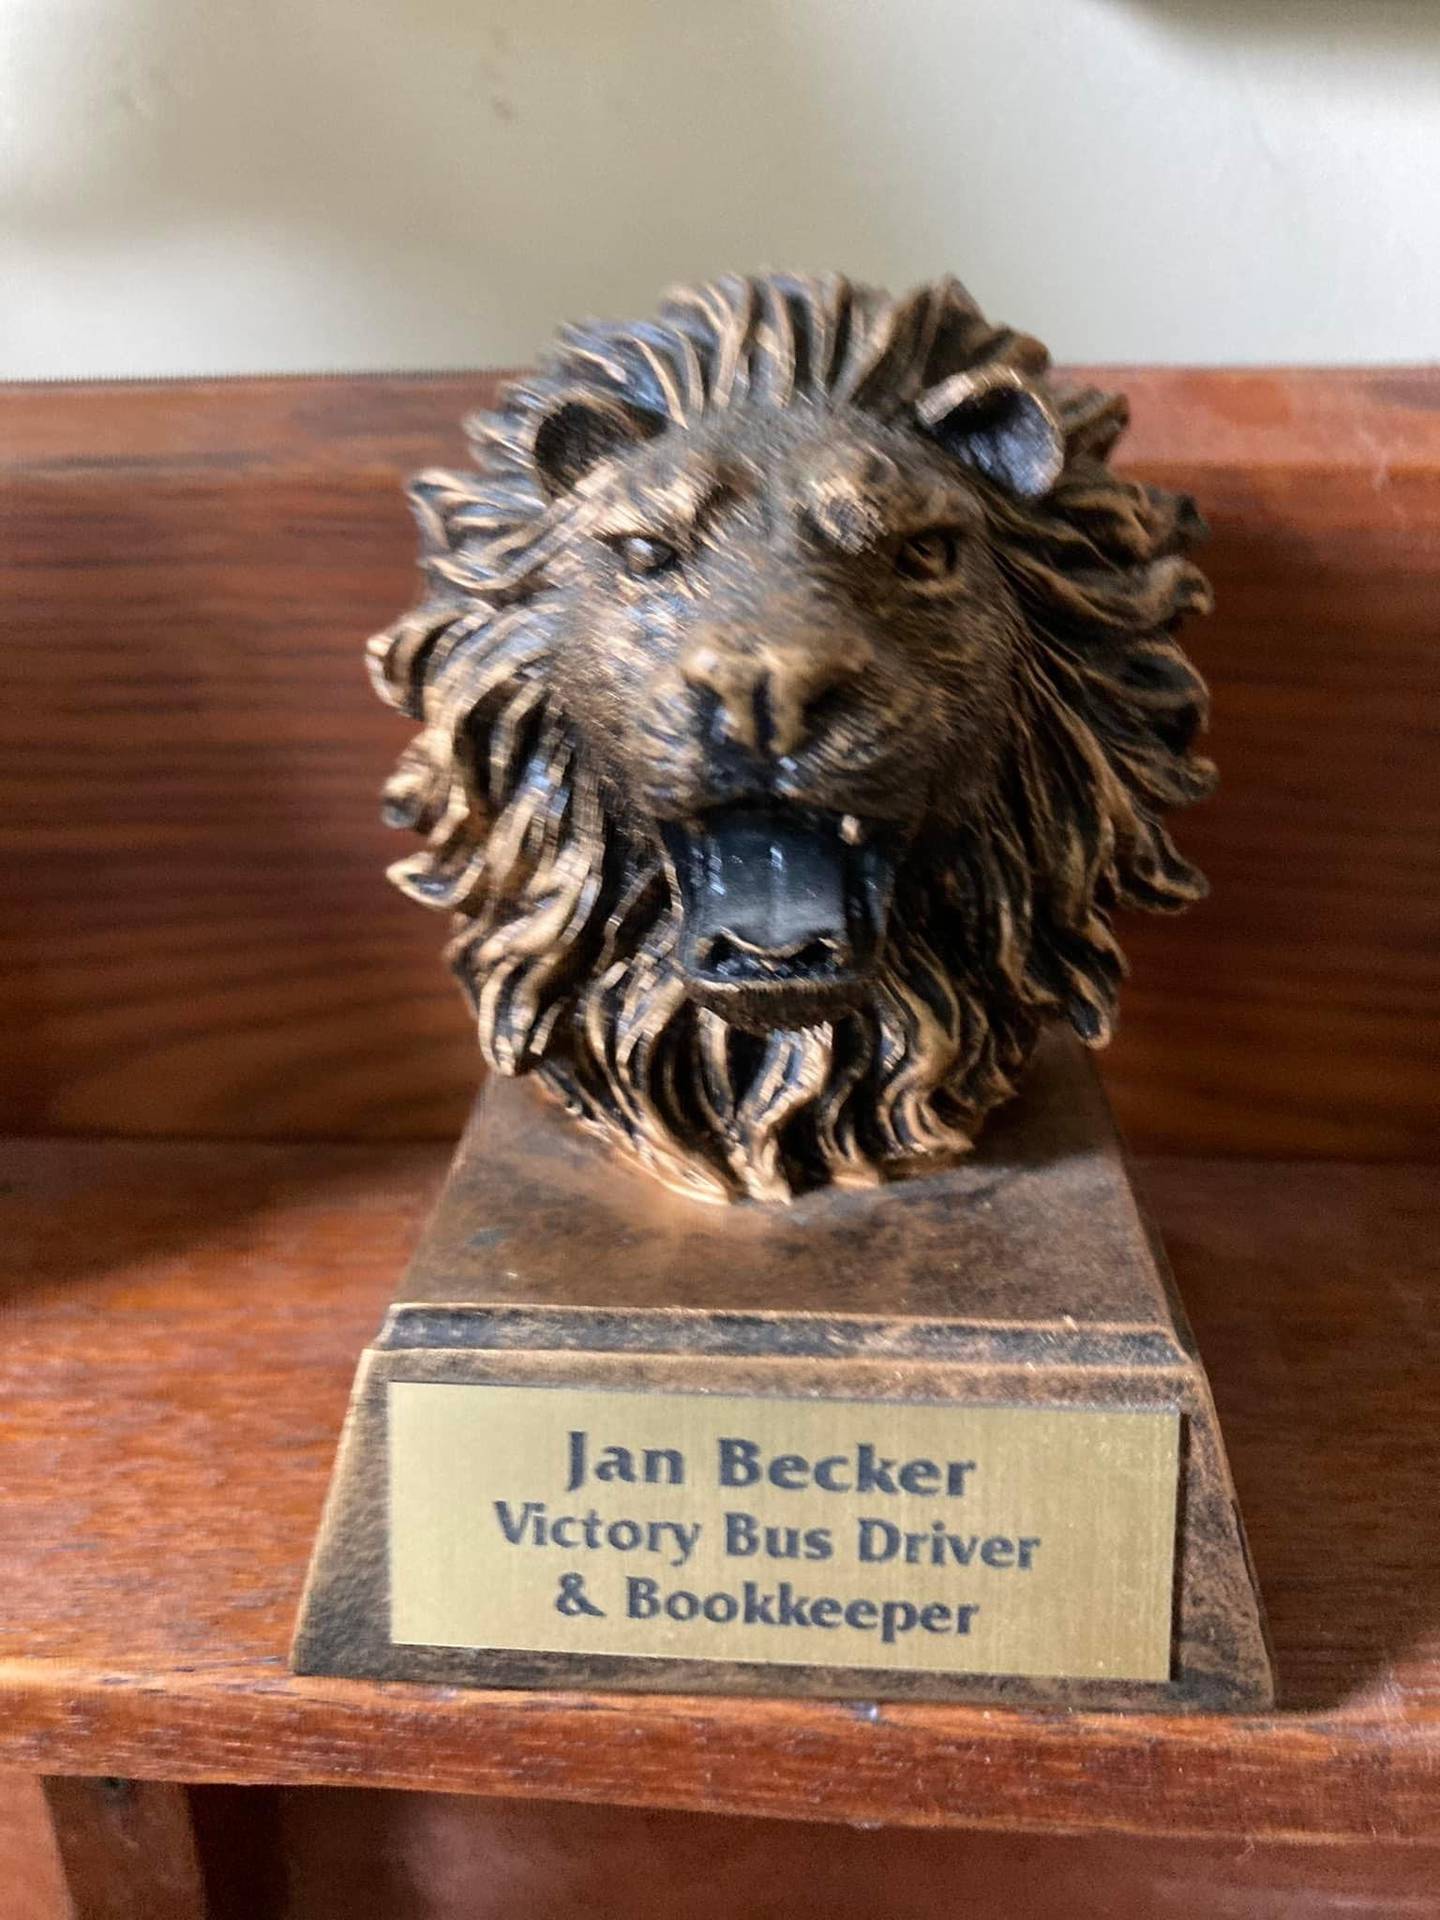 Jan Becker drove the "Victory Bus" for the LaMoille girls sports teams.